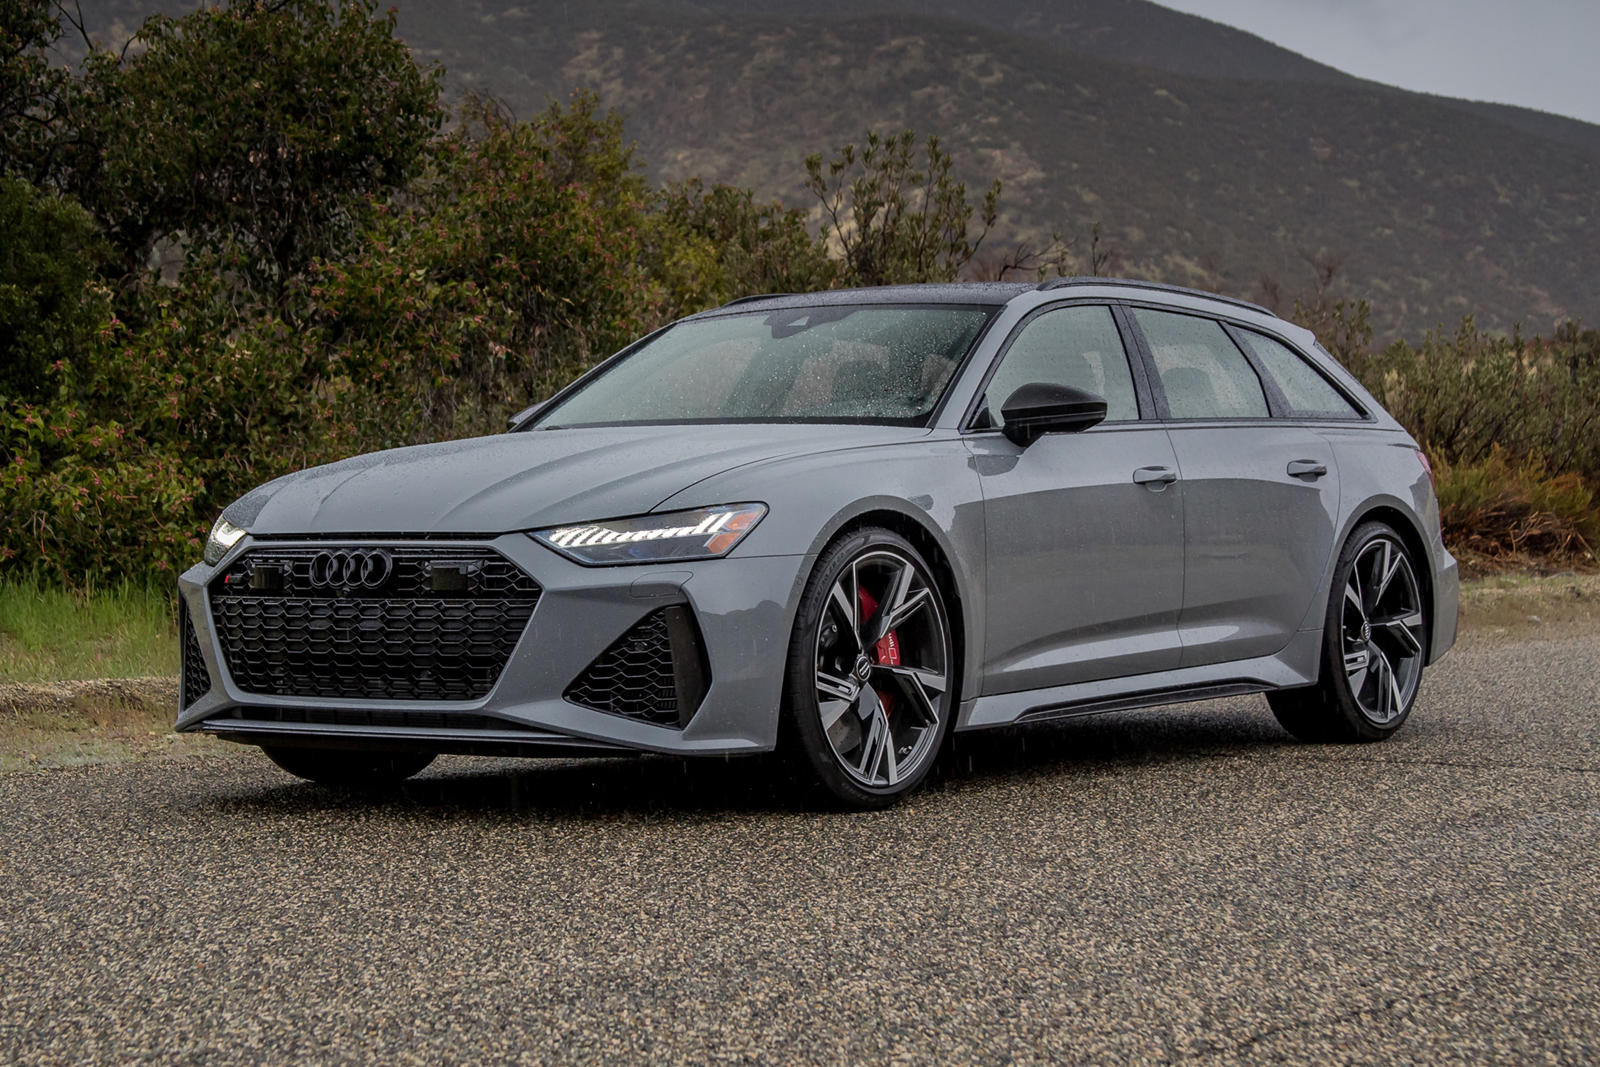 2022 Audi RS6 Avant Review: All-Around All-Star - CNET